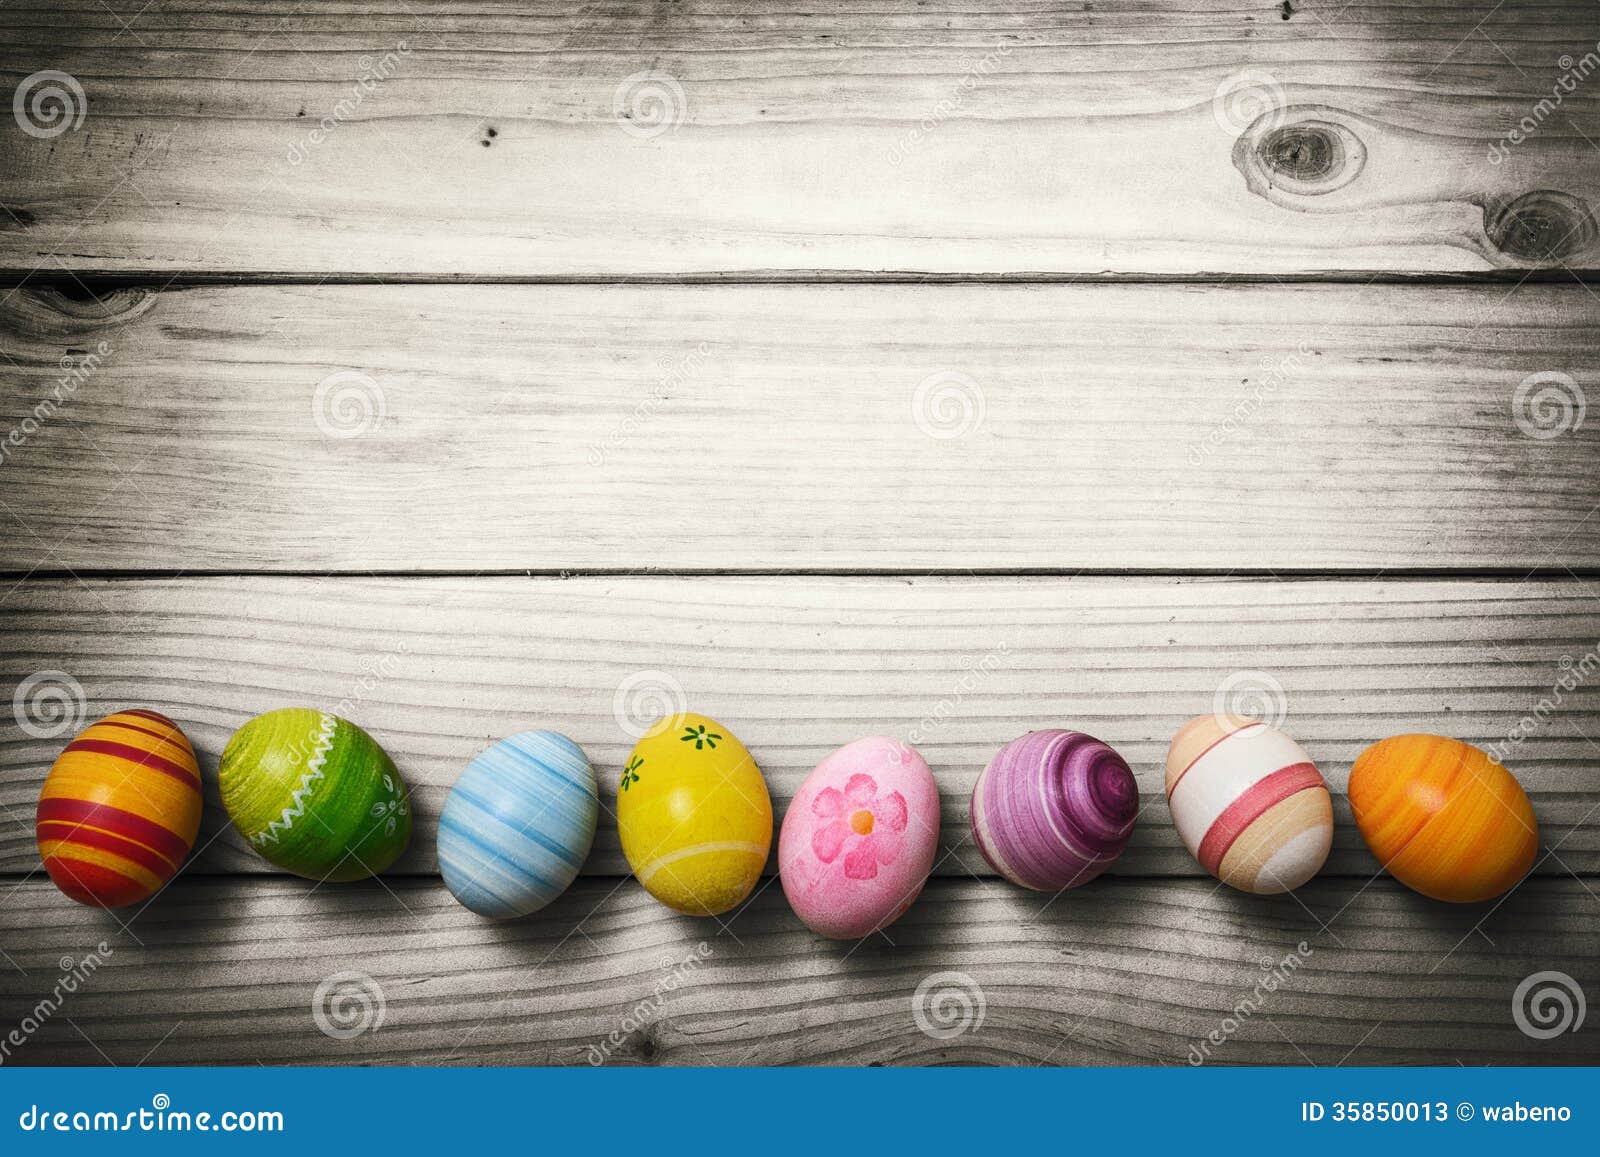 Hand painted colorful Easter eggs on rustic wooden planks.